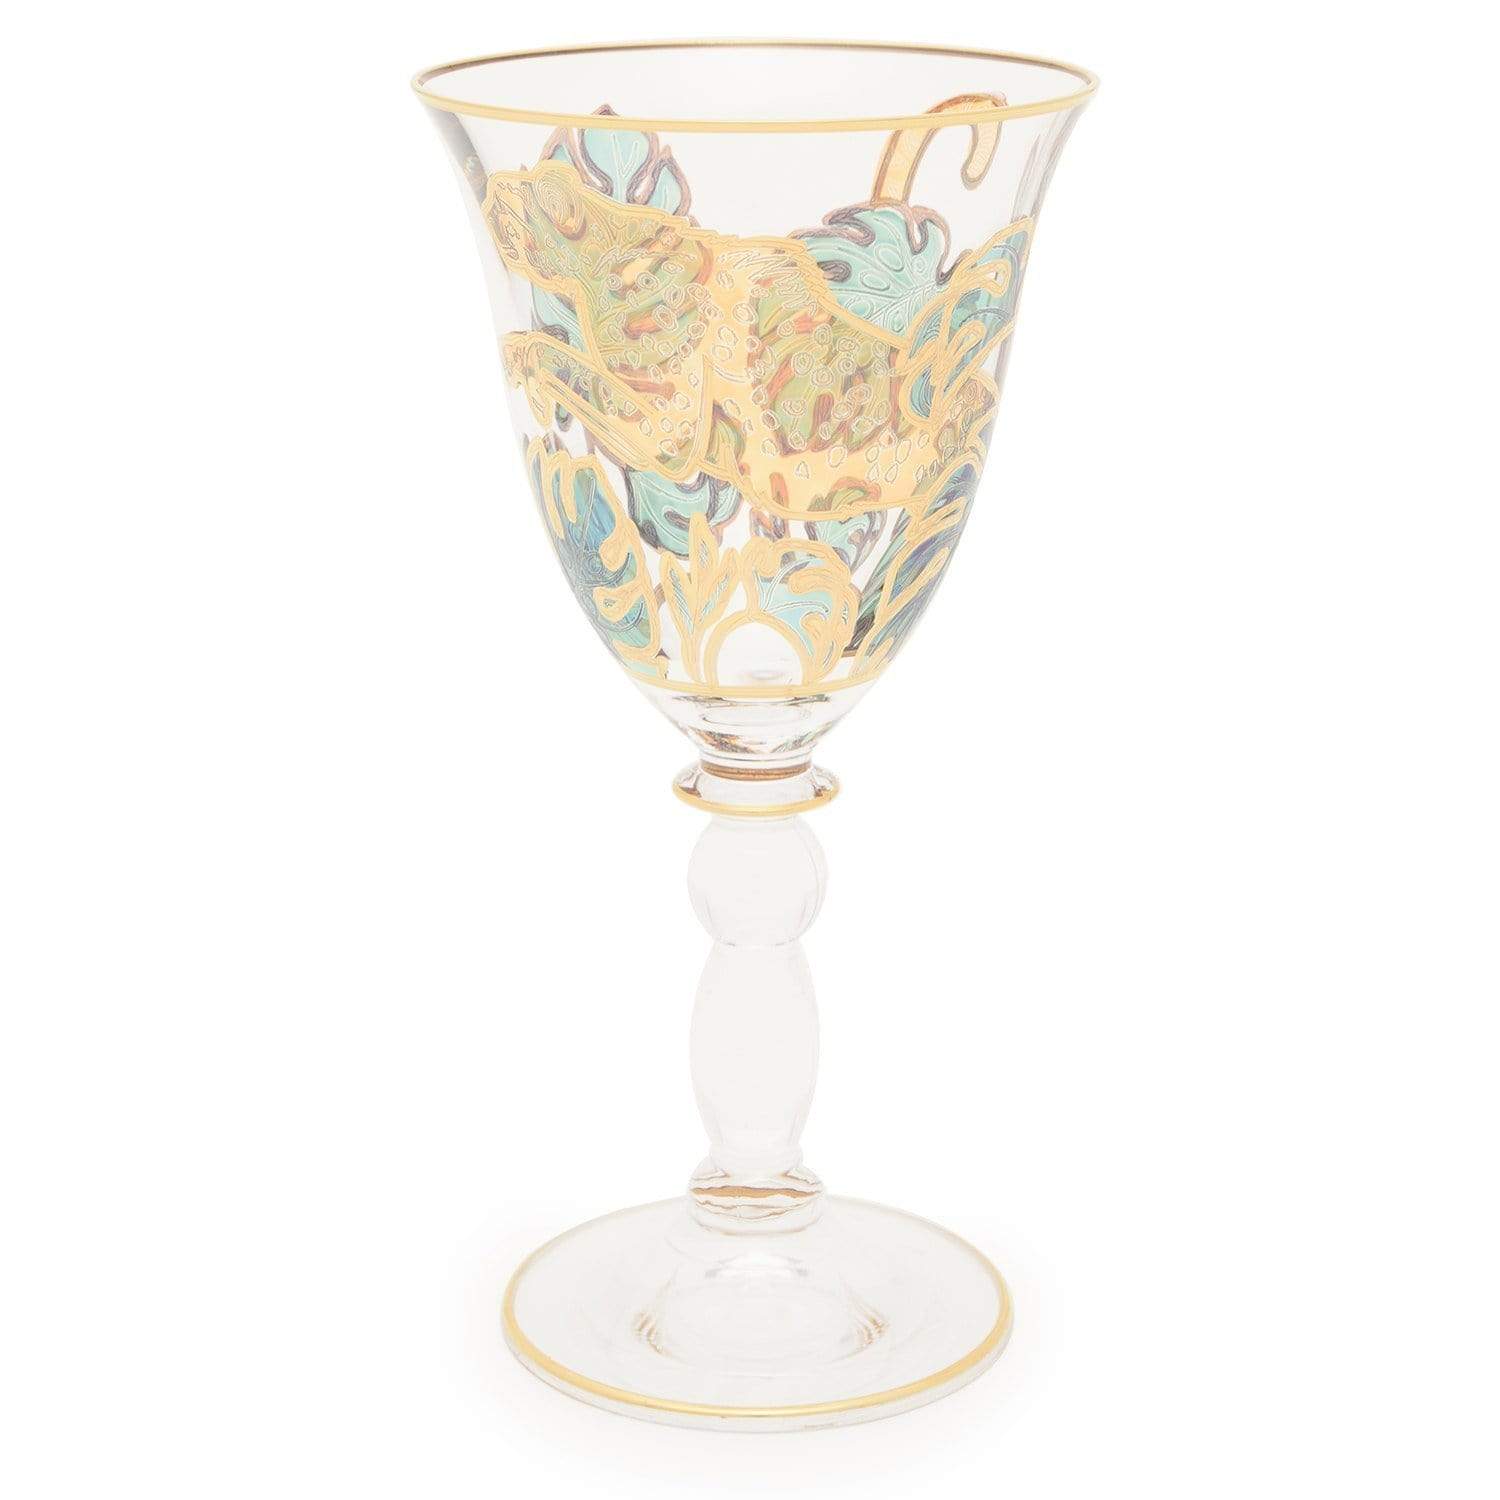 Combi Latisha Goblet Set - Green and Gold, 190 ml, Small, 6 Piece - G748Z/97 - Jashanmal Home